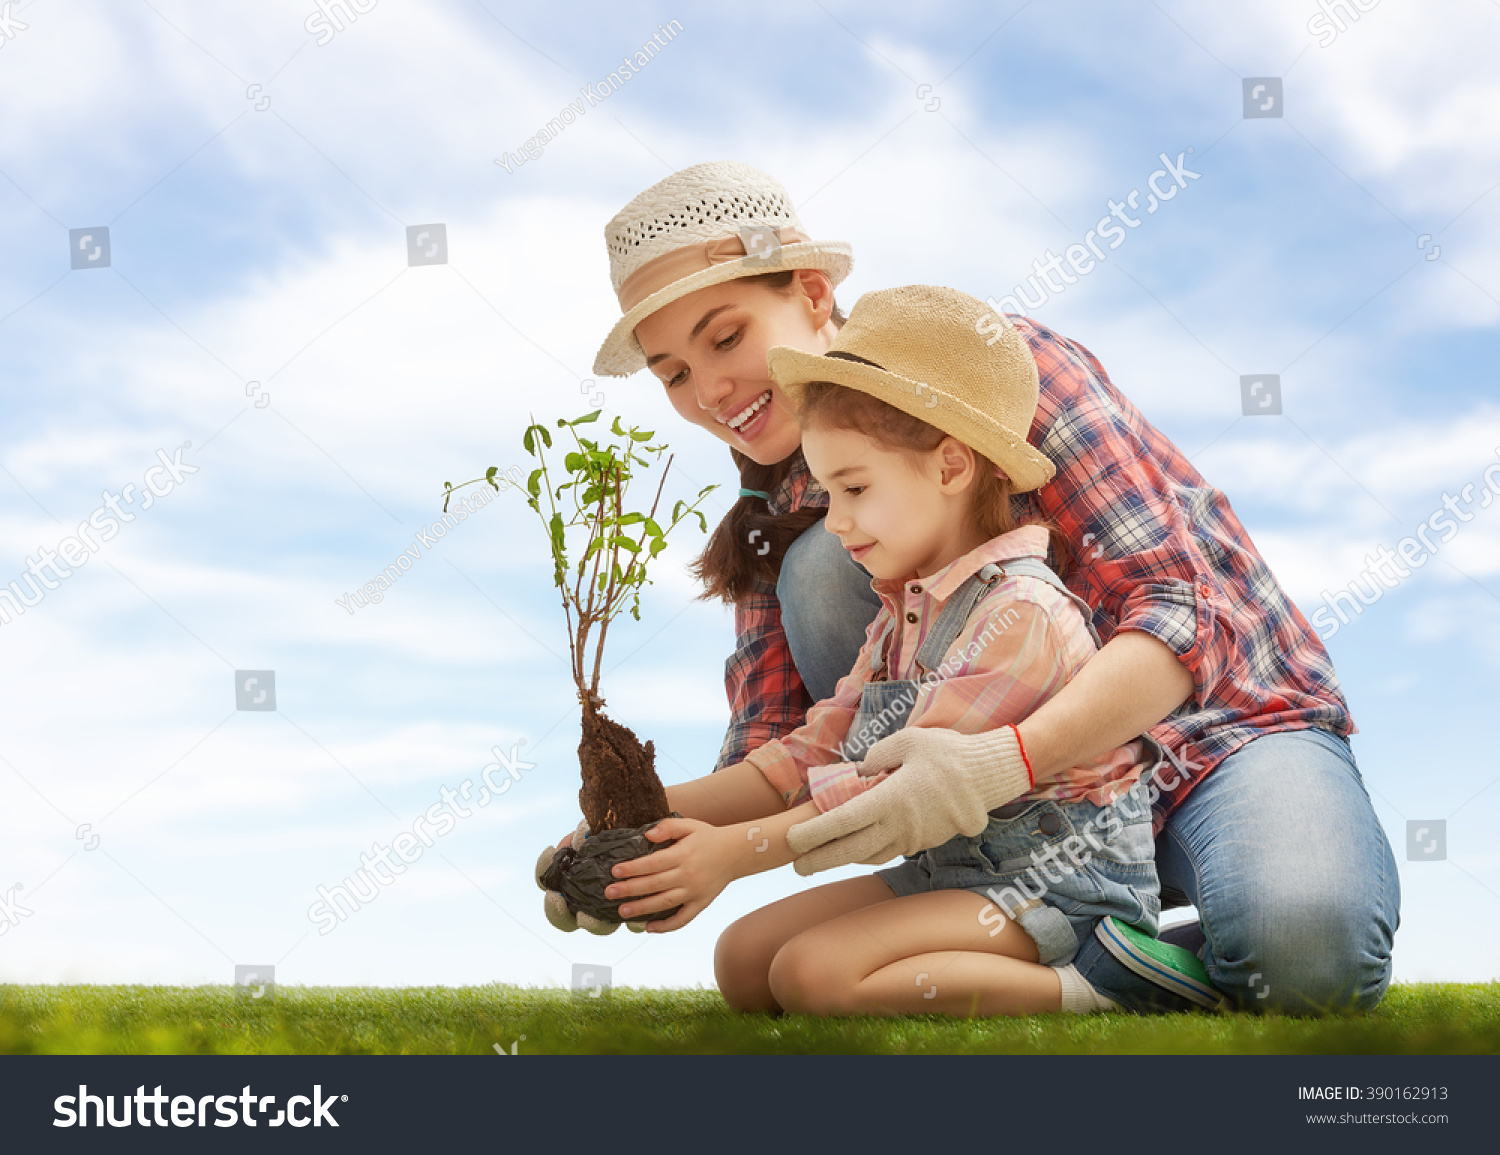 Mom and her child girl plant sapling tree. Spring concept, nature and care. #390162913